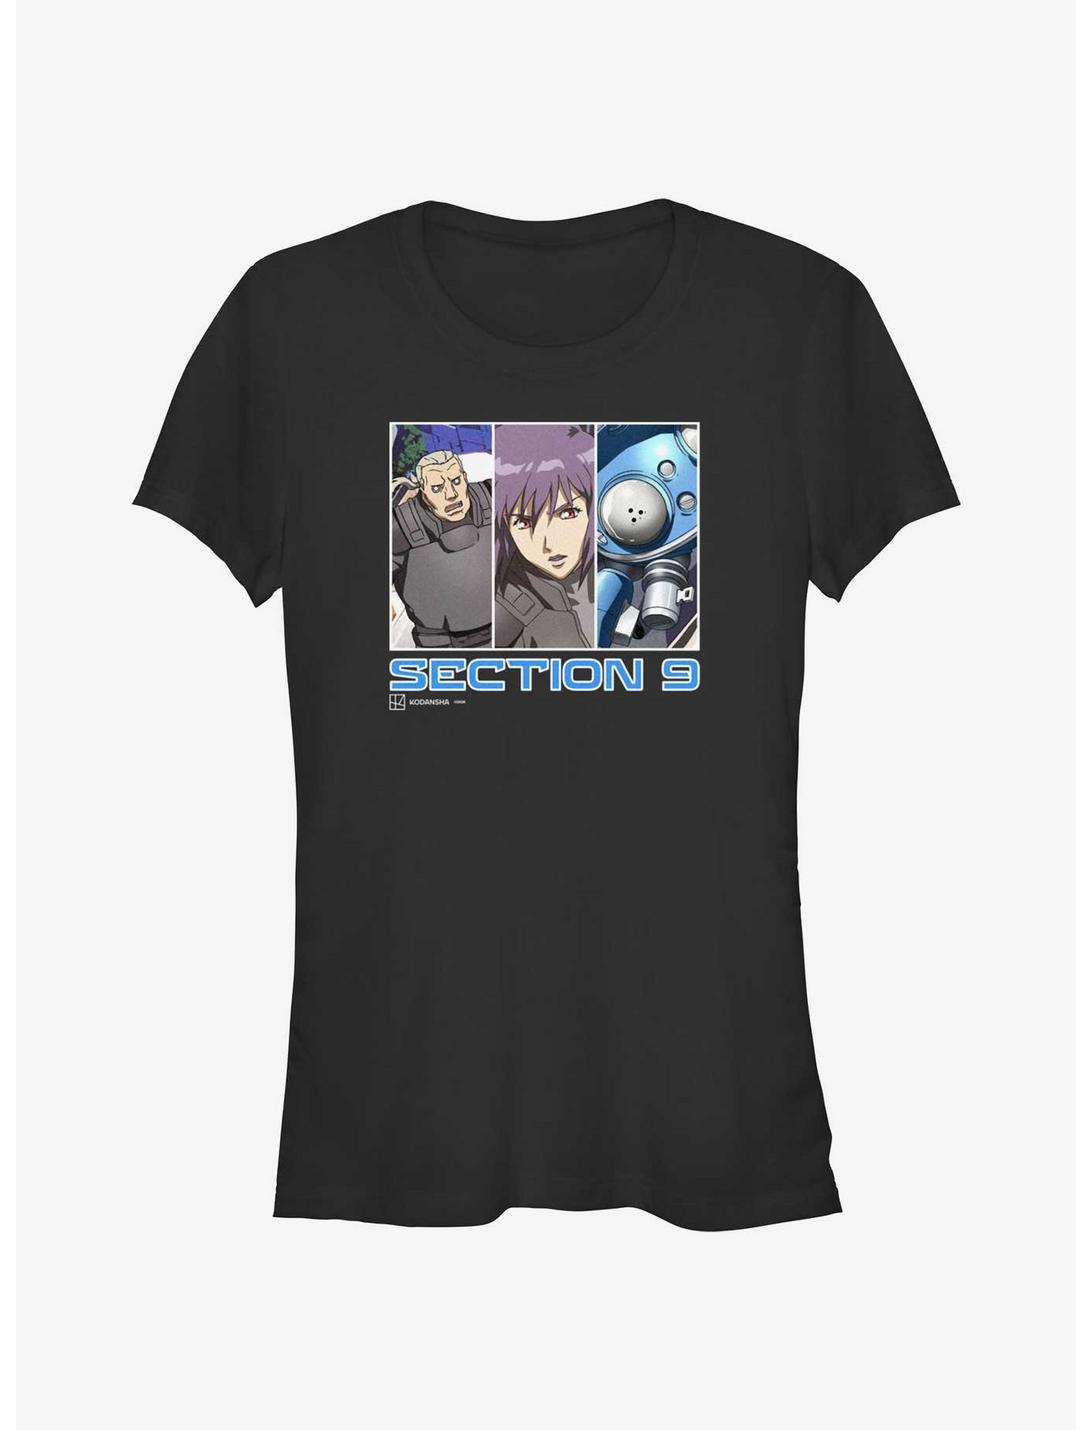 Ghost in the Shell Section 9 Team Girls T-Shirt, BLACK, hi-res